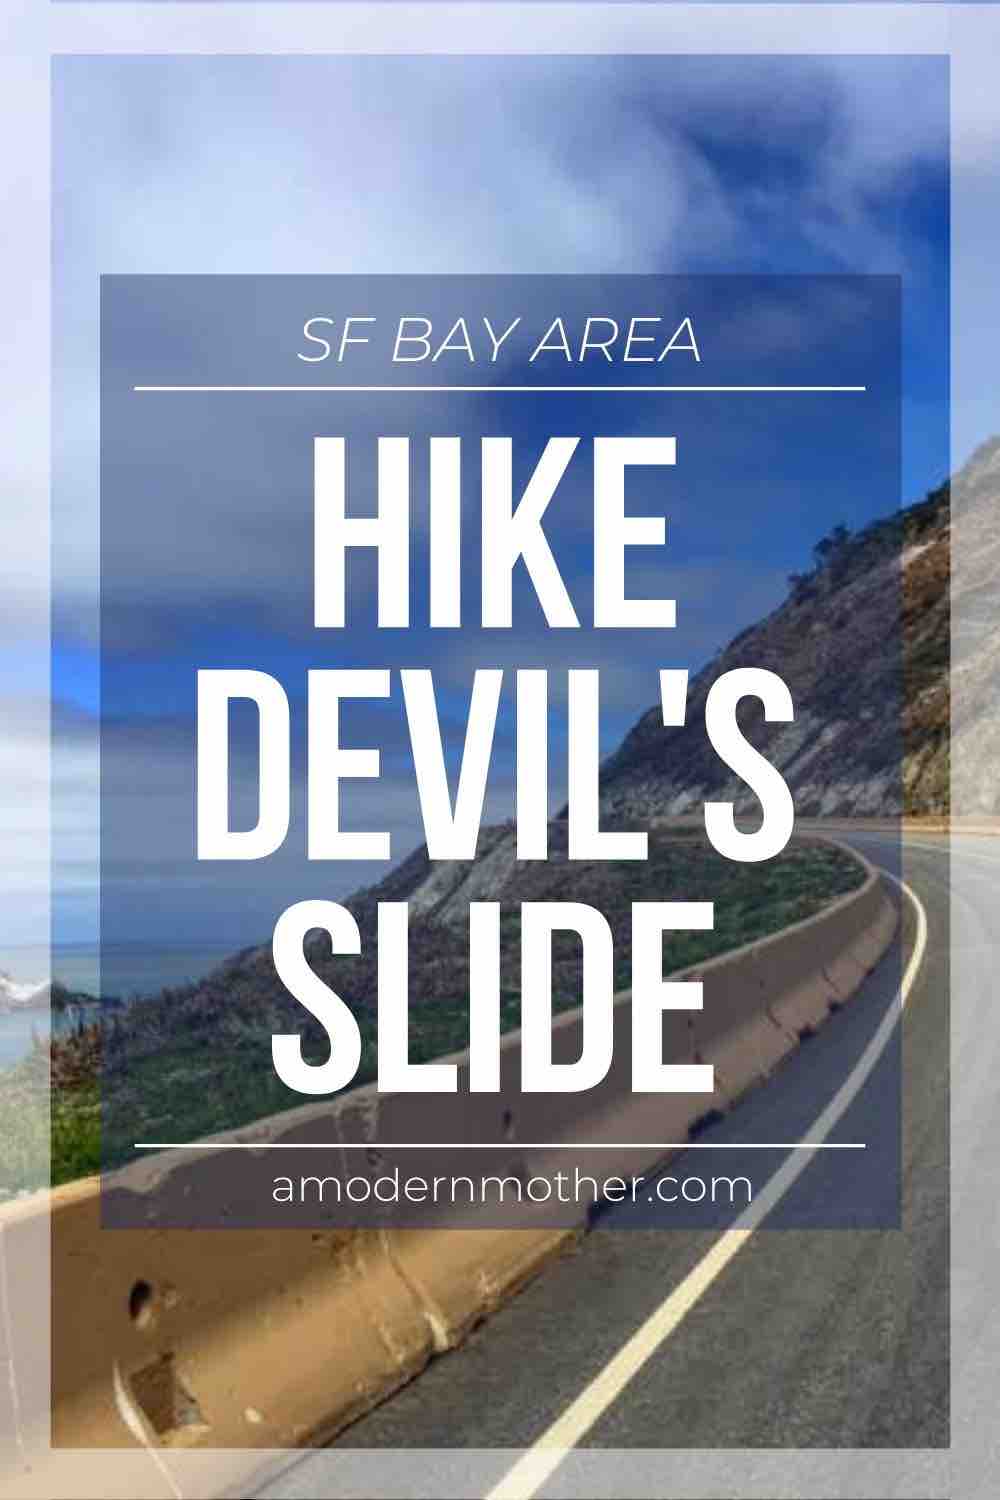 Hike Devil's Slide - tips, parking, how to get there, where to eat after and more!